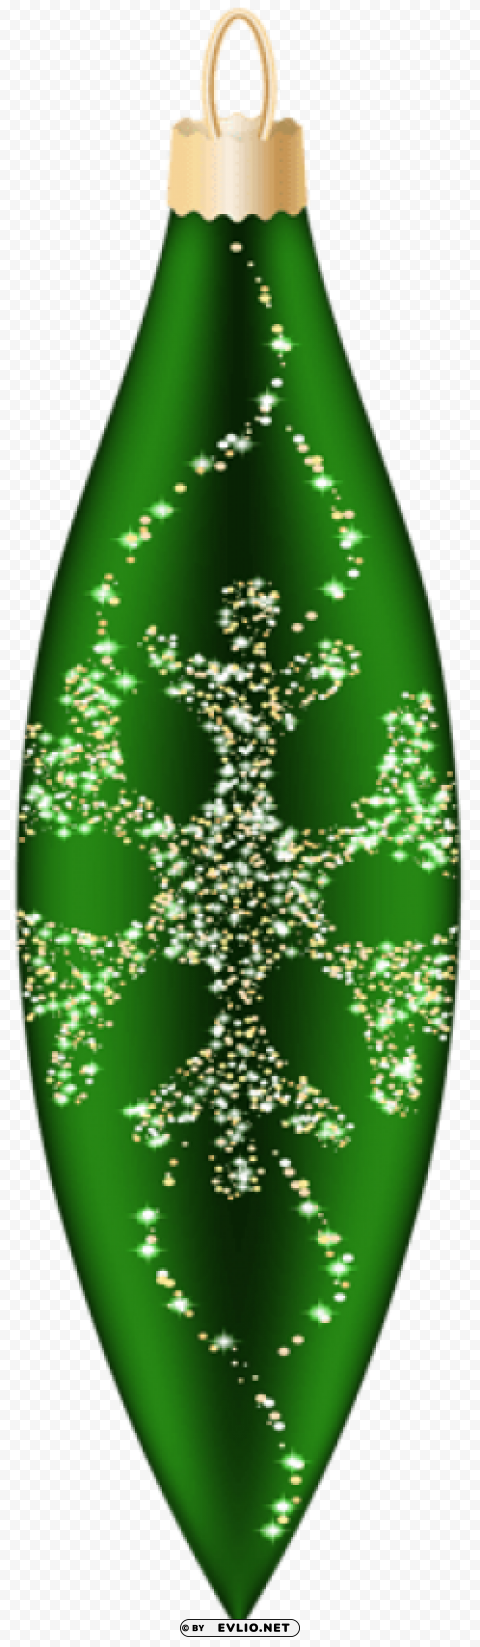 green christmas ornament Isolated Artwork on HighQuality Transparent PNG